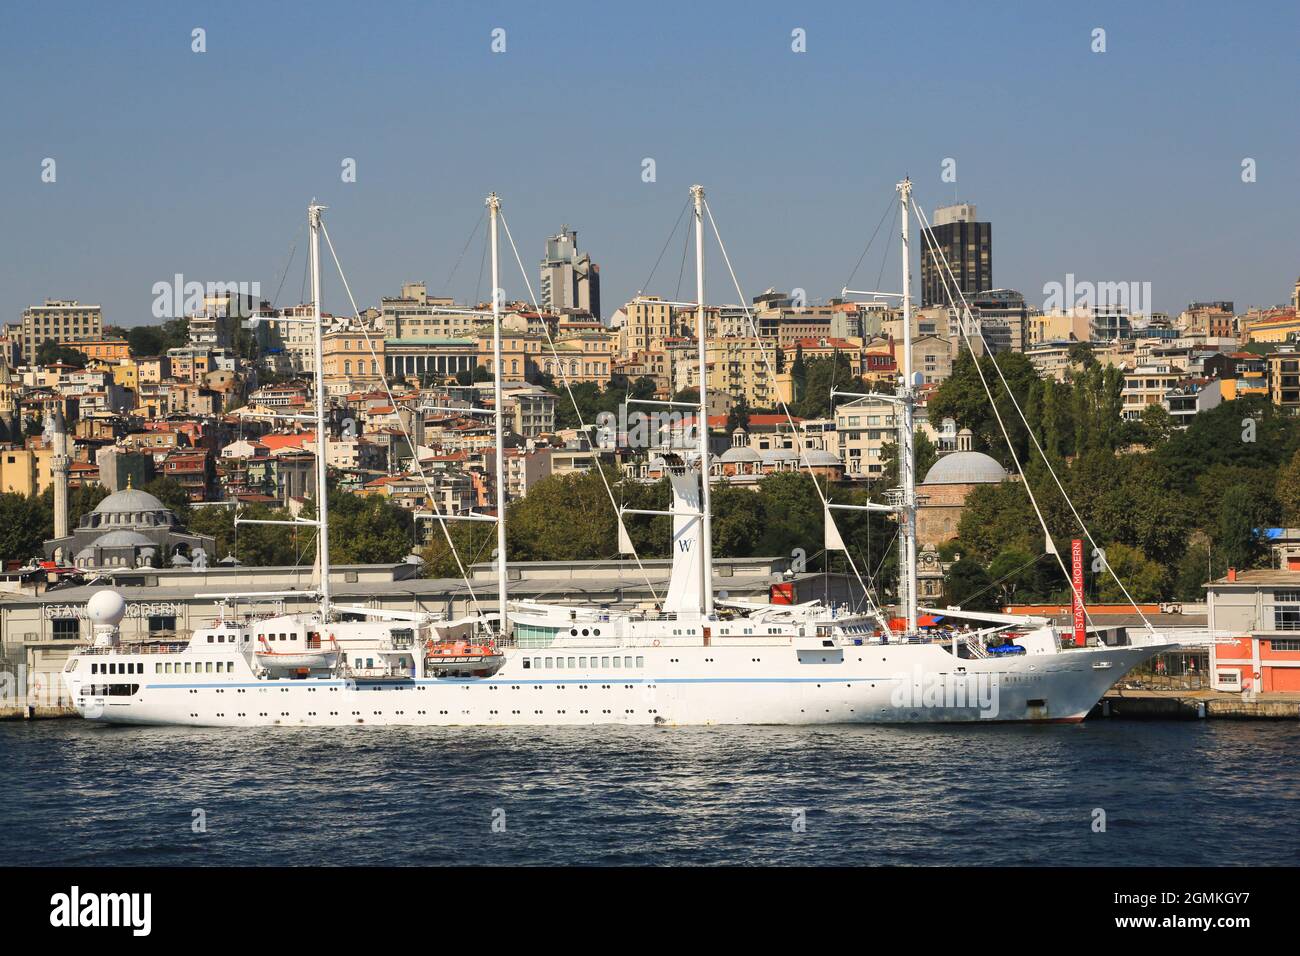 The four-masted sailing cruise ship, Wind Star, docked in the Bosphorus at Istanbul, Turkey on a sunny day. Stock Photo